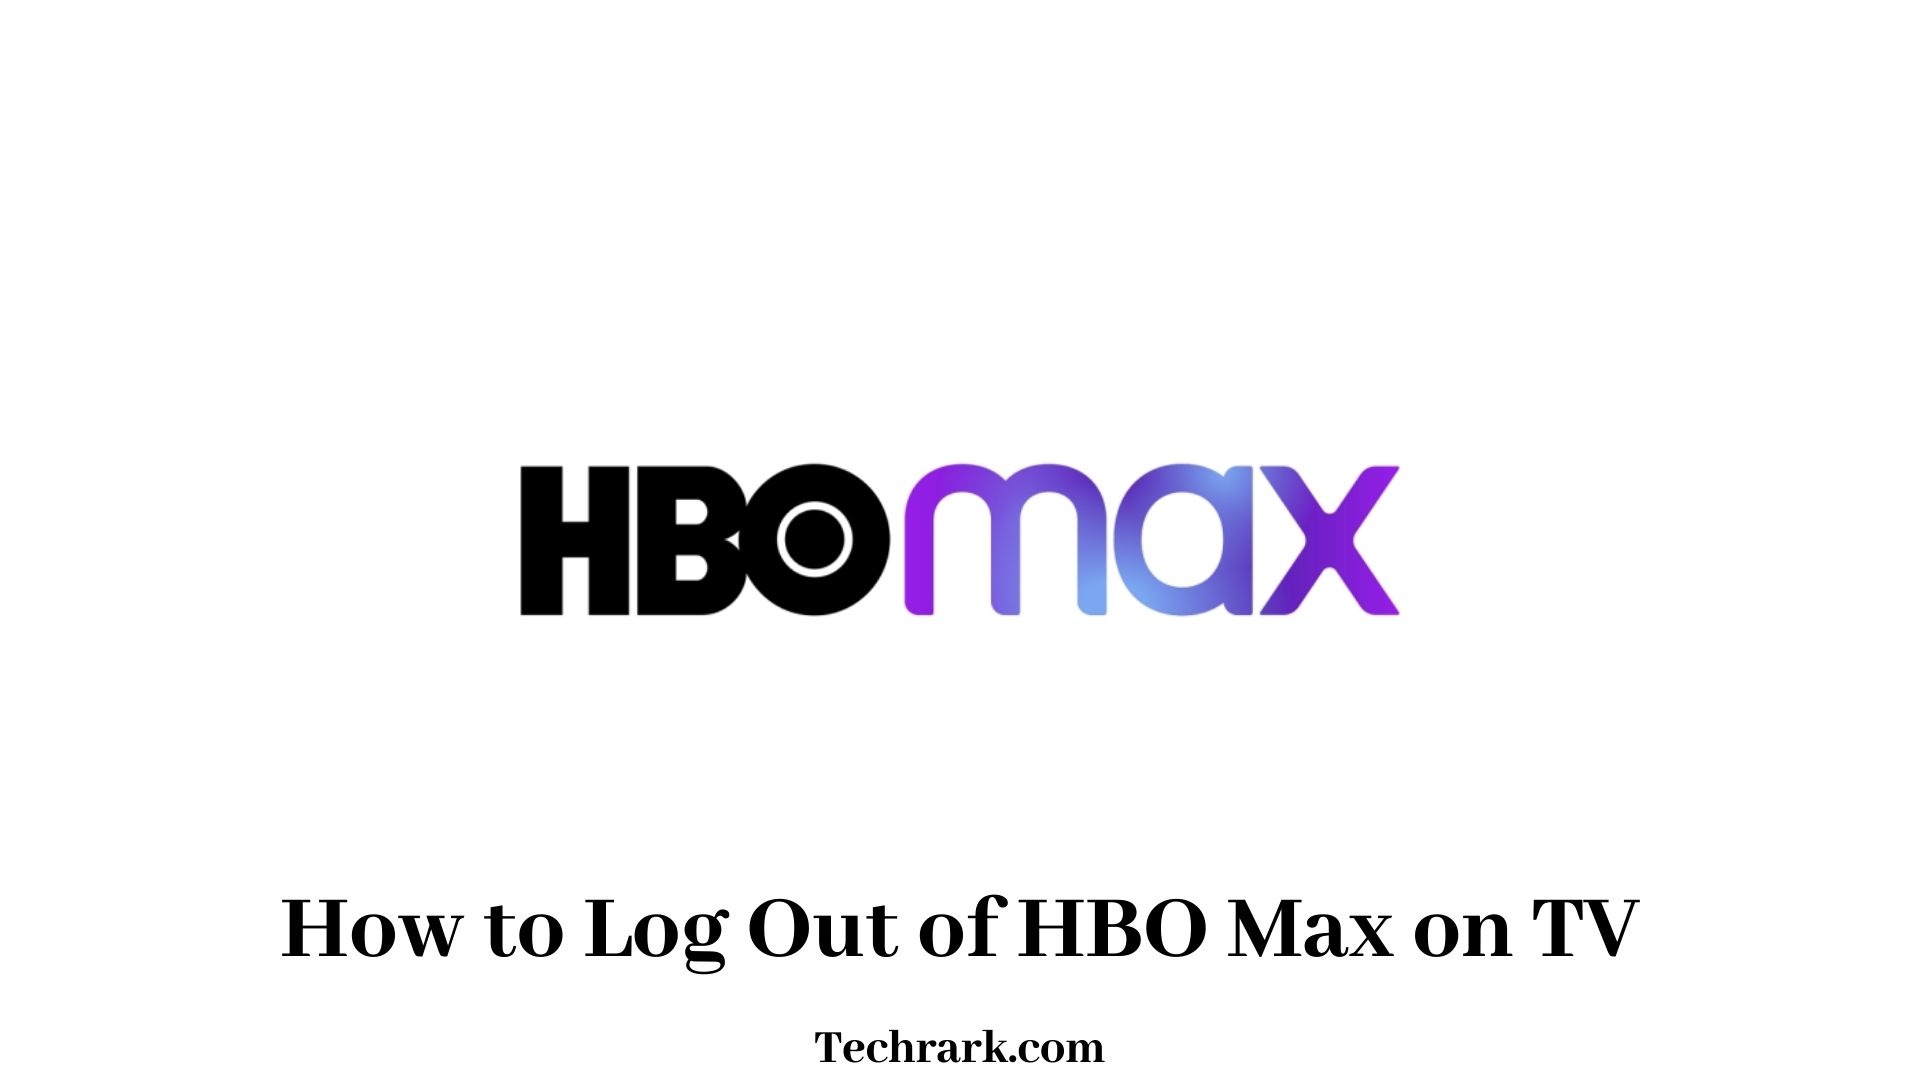 How to Log Out of HBO Max on TV